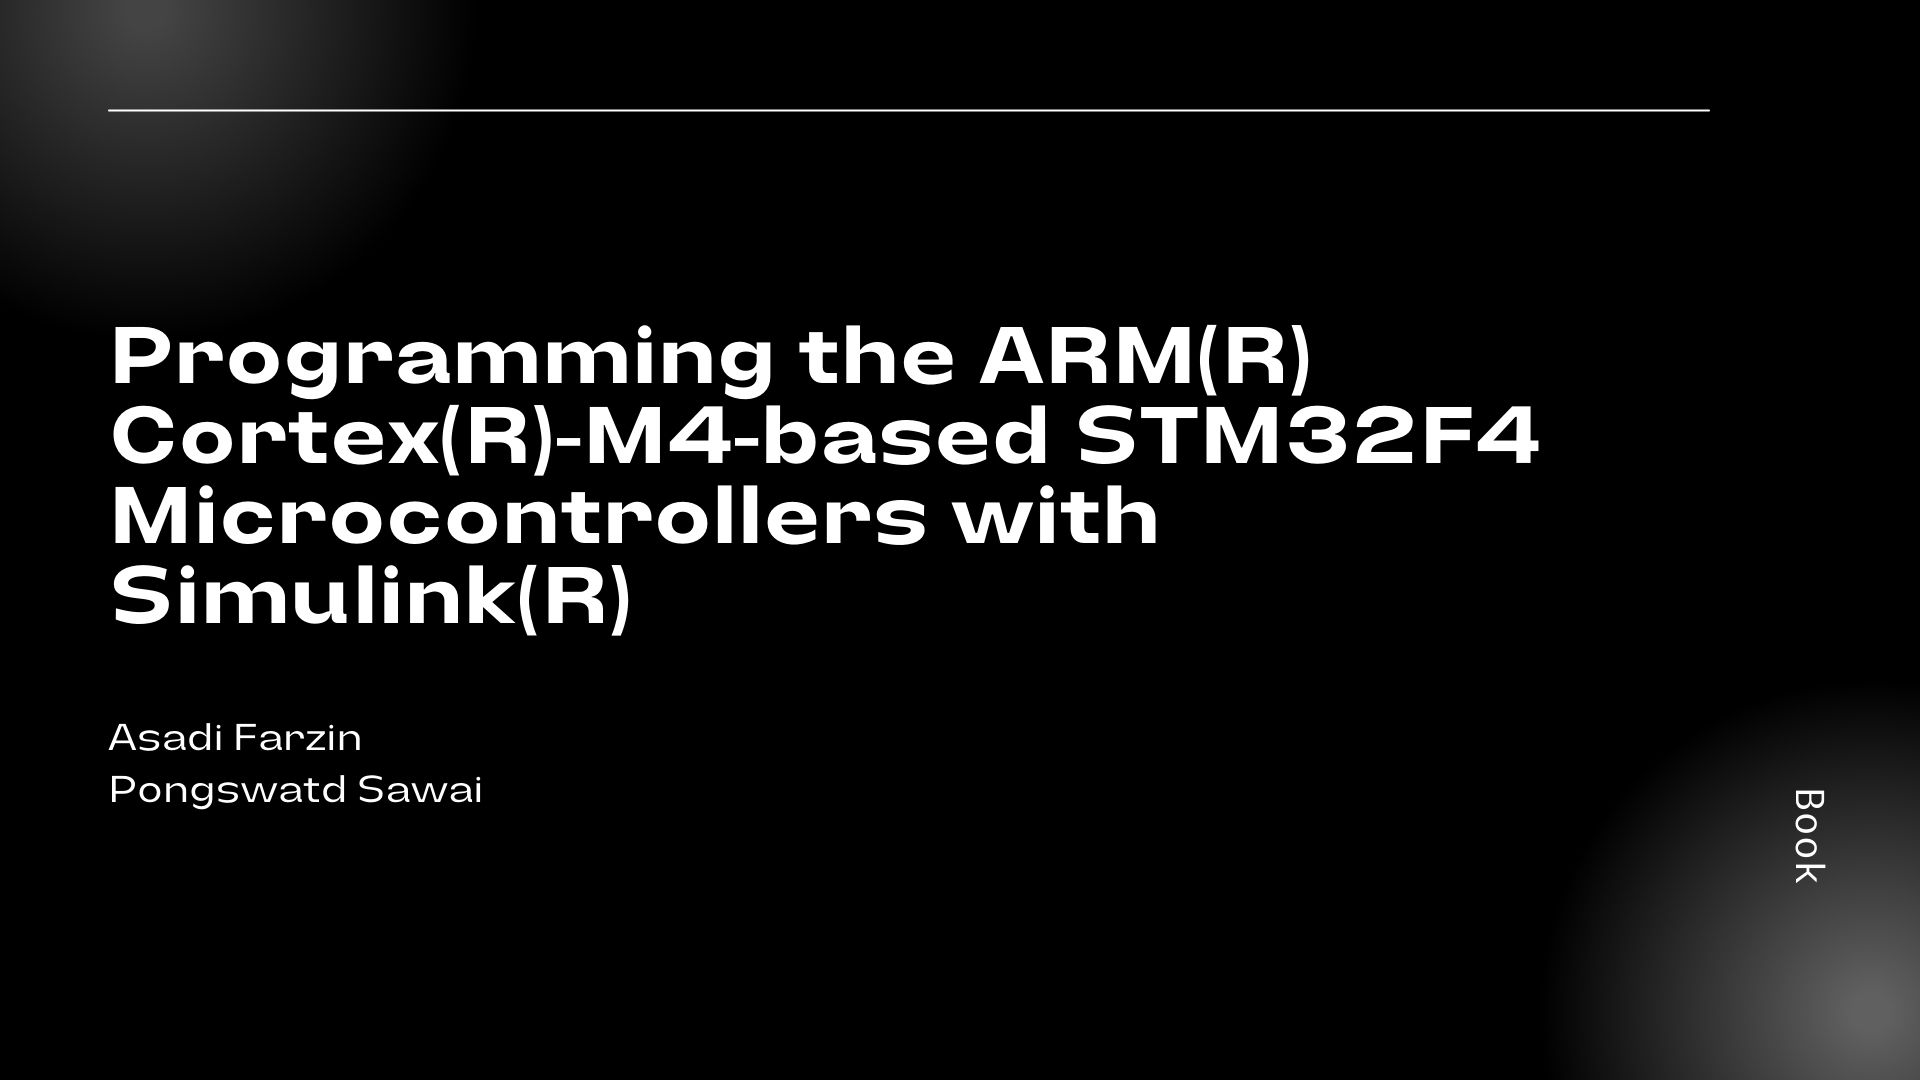 Programming the ARM(R) Cortex(R)-M4-based STM32F4 Microcontrollers with Simulink(R)